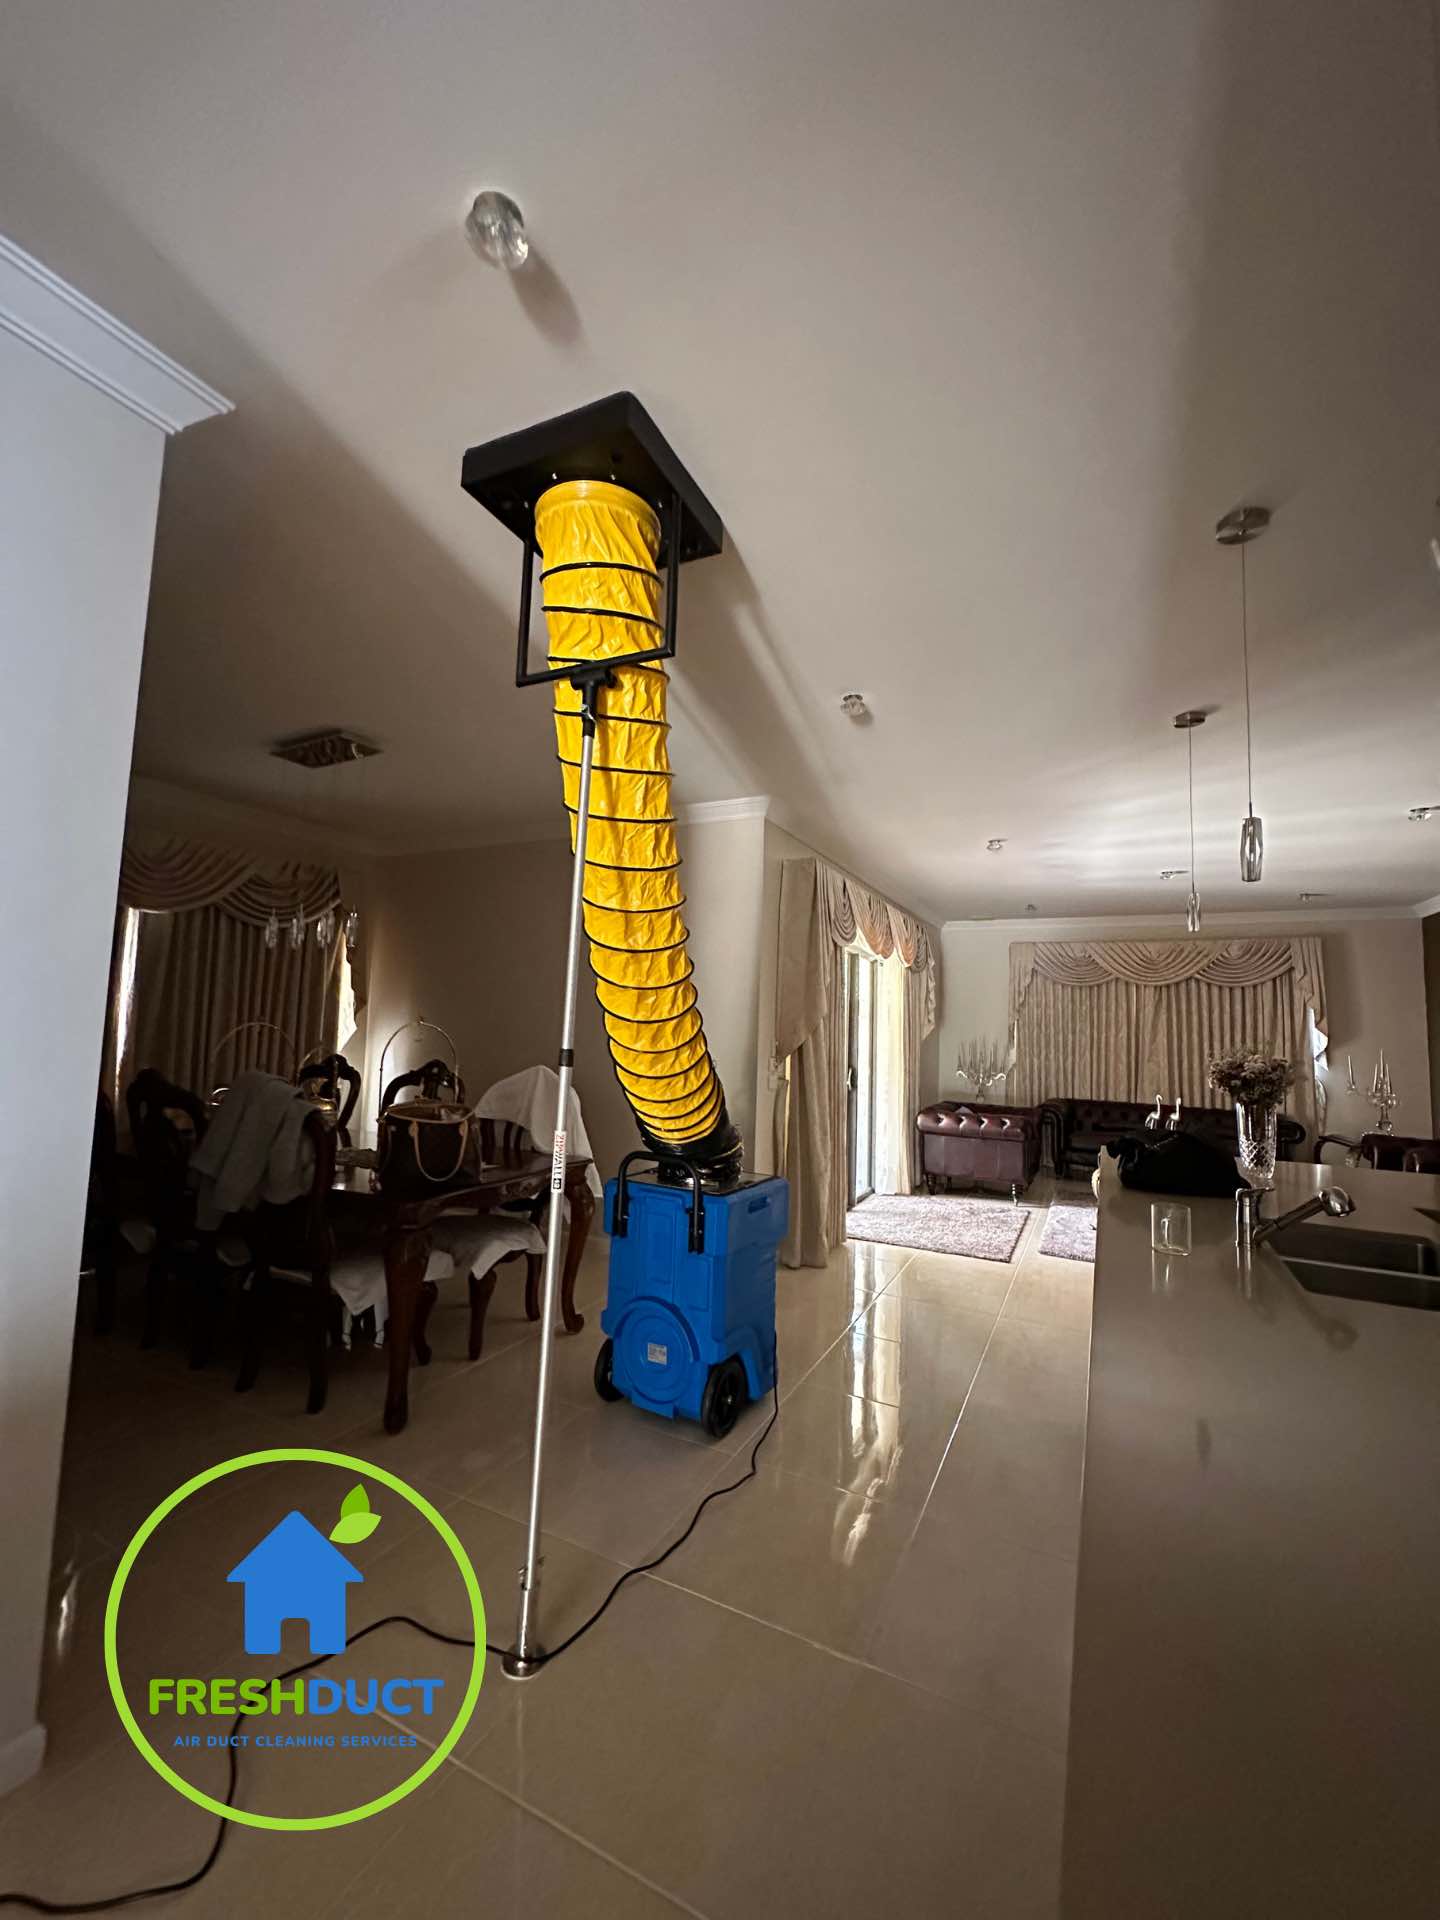 Ceiling Supply Vents Duct Cleaning Melbourne